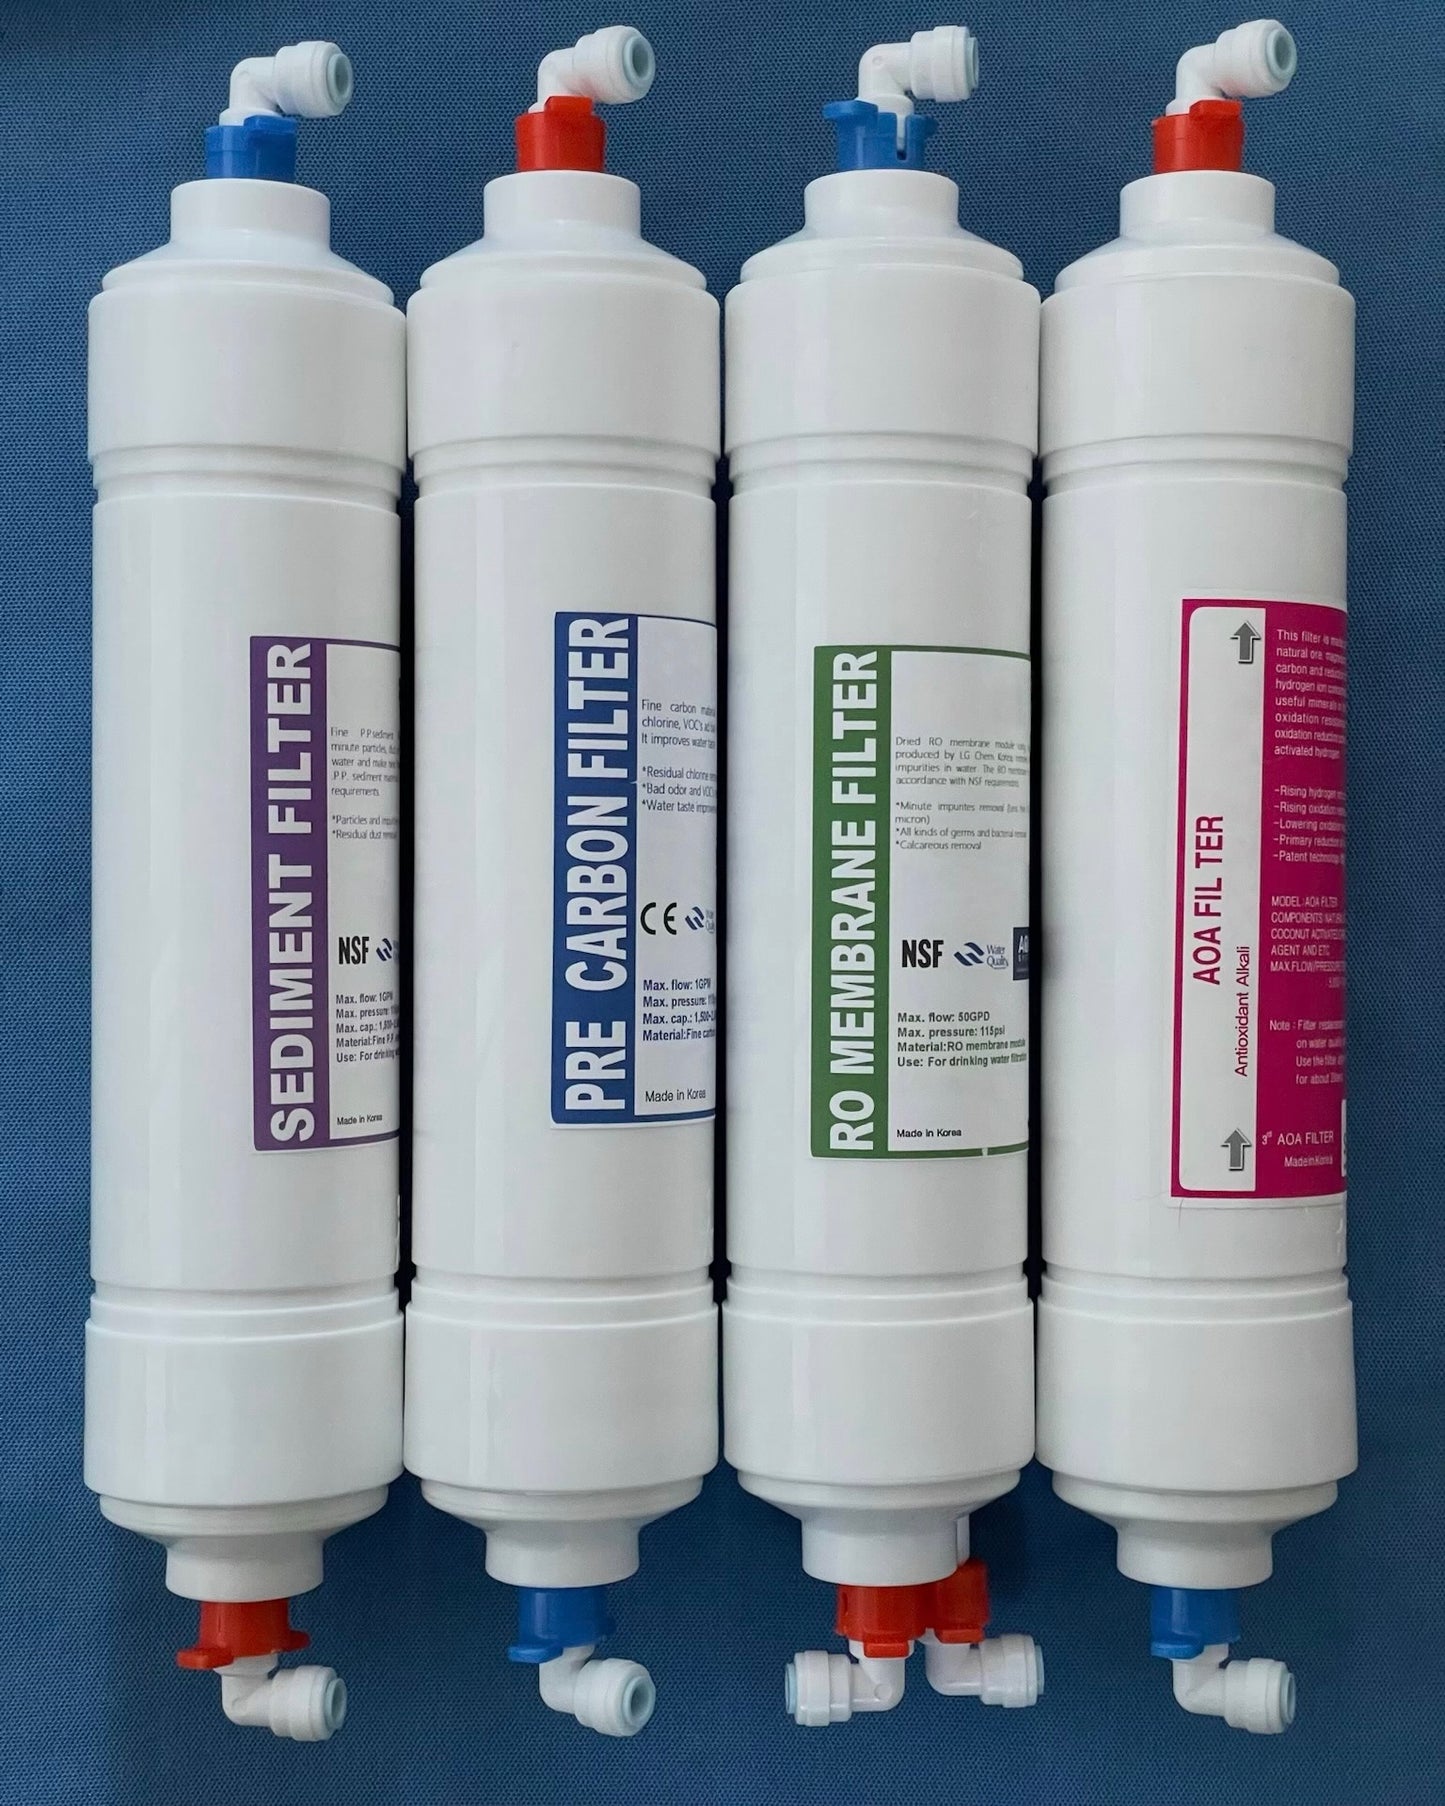 12” Inline I-Type Reverse Osmosis Replacement Set with Fittings includes 4 filters. Sediment Filter, Pre Carbon Filter, Reverse Osmosis Membrane, Alkaline Filter and 9 color coded (orange and blue) Fittings.